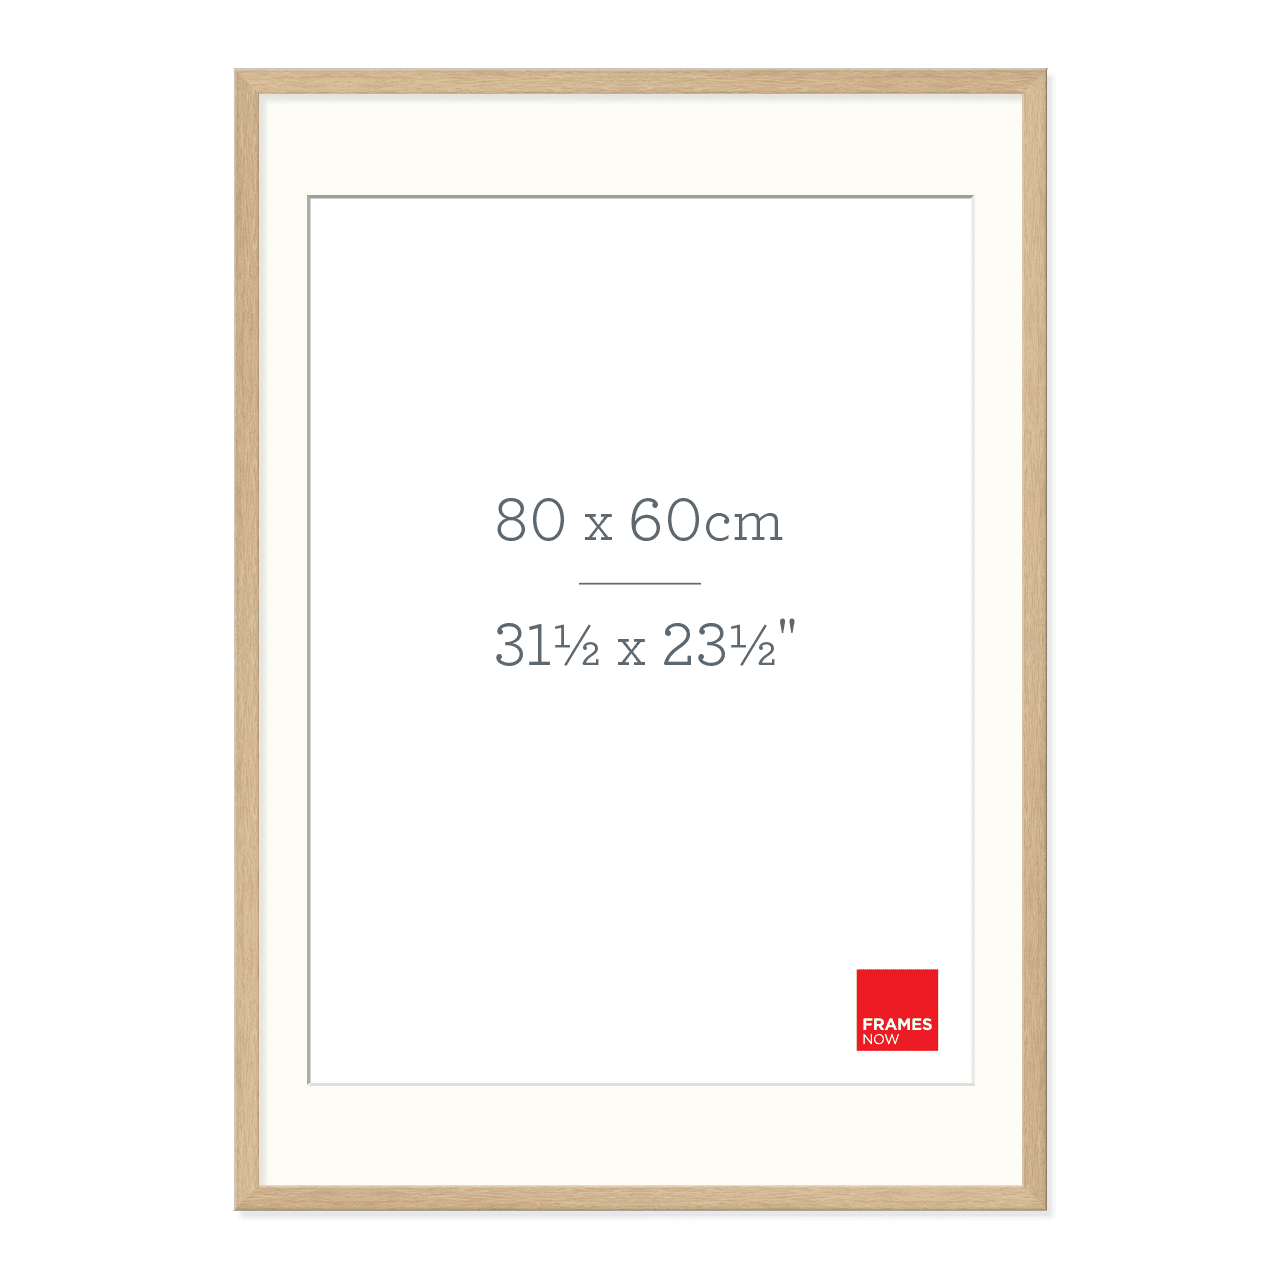 Premium Natural Oak Picture Frame with Matboard for 80 x 60cm Artwork